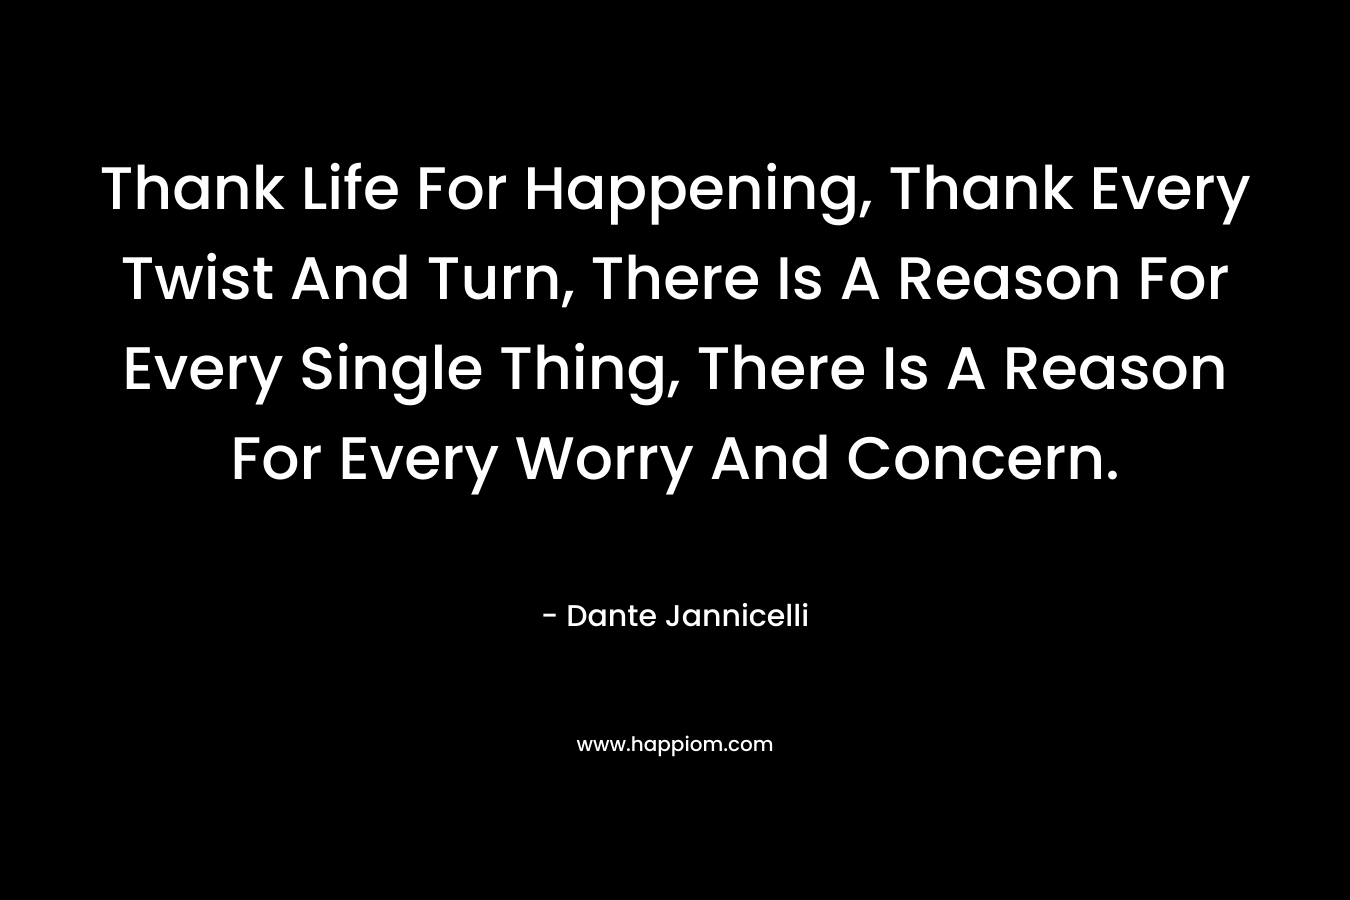 Thank Life For Happening, Thank Every Twist And Turn, There Is A Reason For Every Single Thing, There Is A Reason For Every Worry And Concern. – Dante Jannicelli